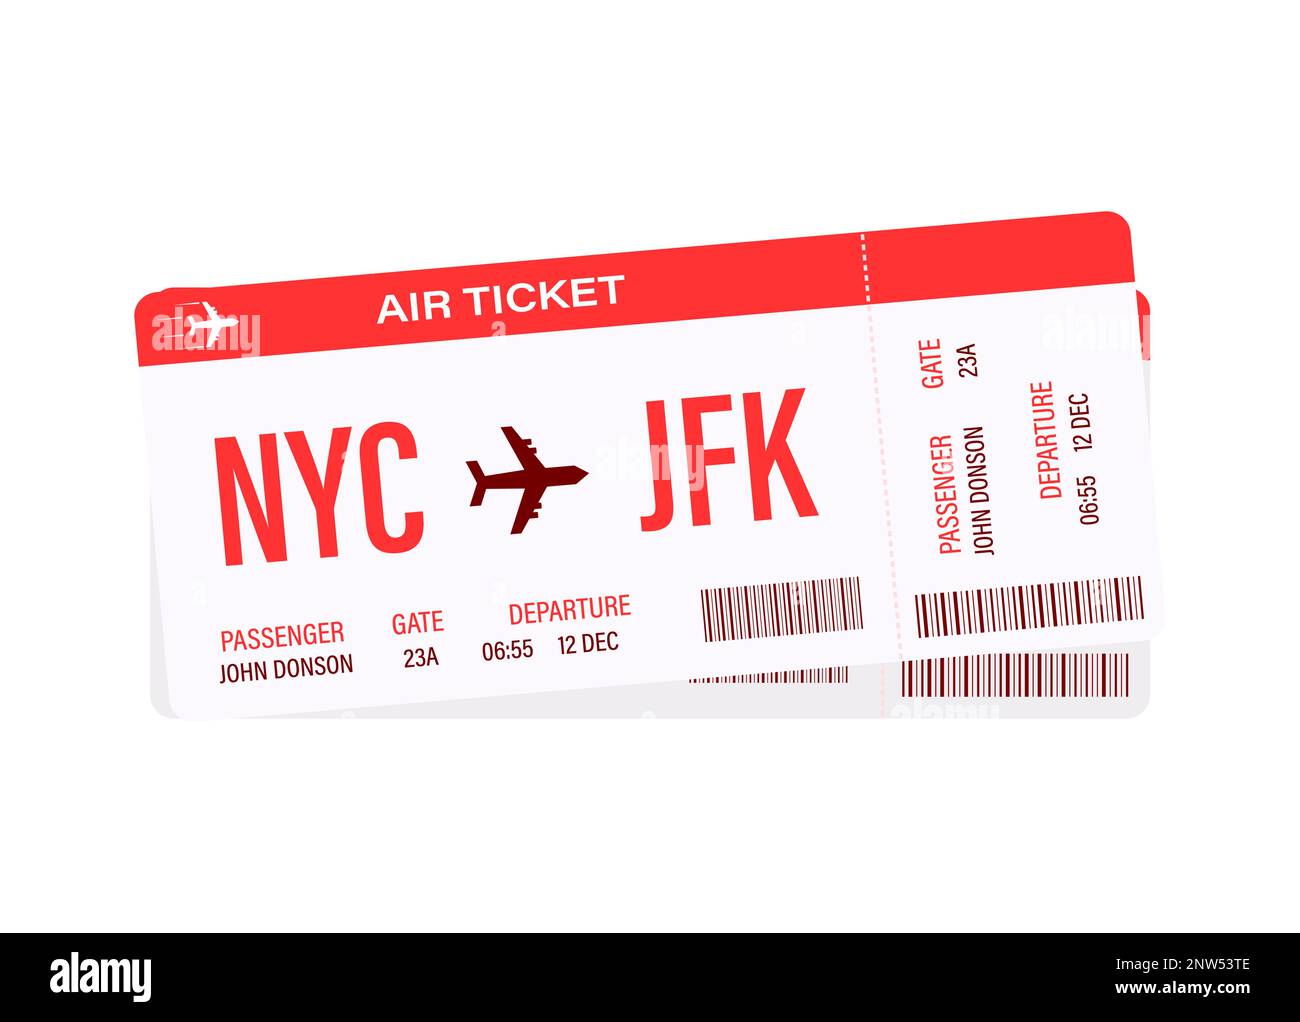 Airline ticket. Travel Boarding pass ticket template Stock Vector